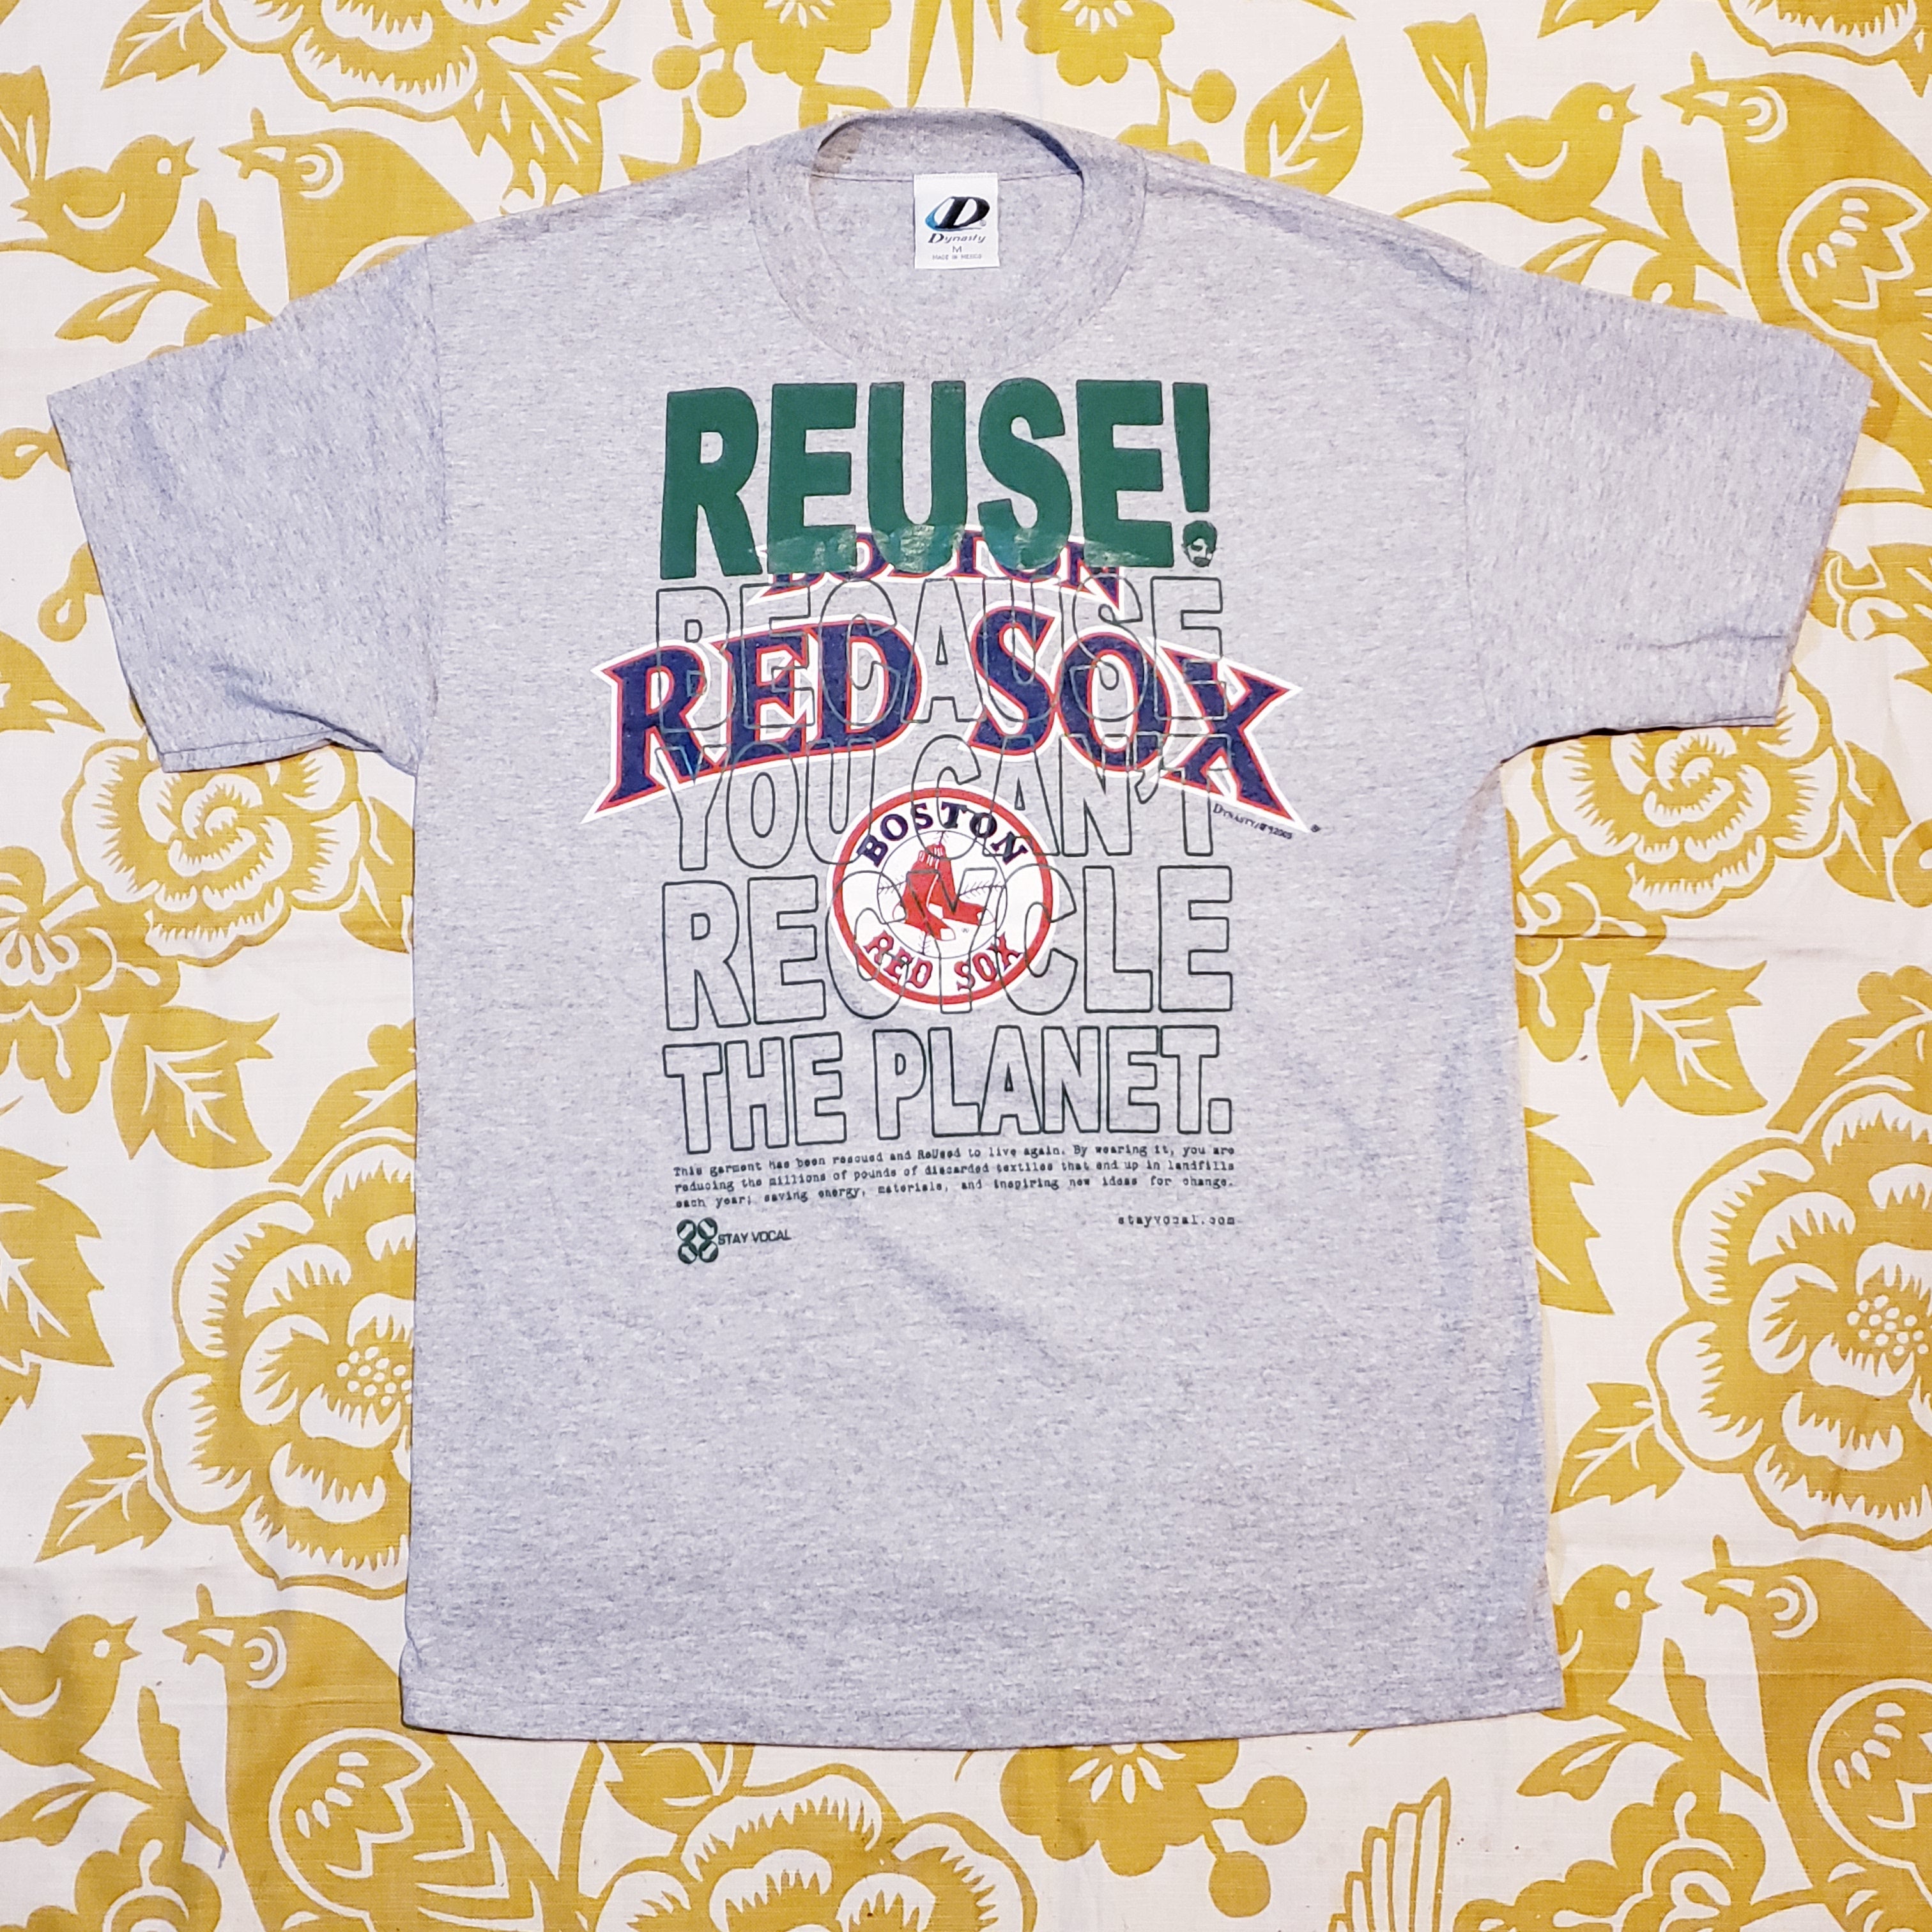 One of a Kind (Men's M) REUSE! Boston Red Sox Baseball Name & Logo T-Shirt